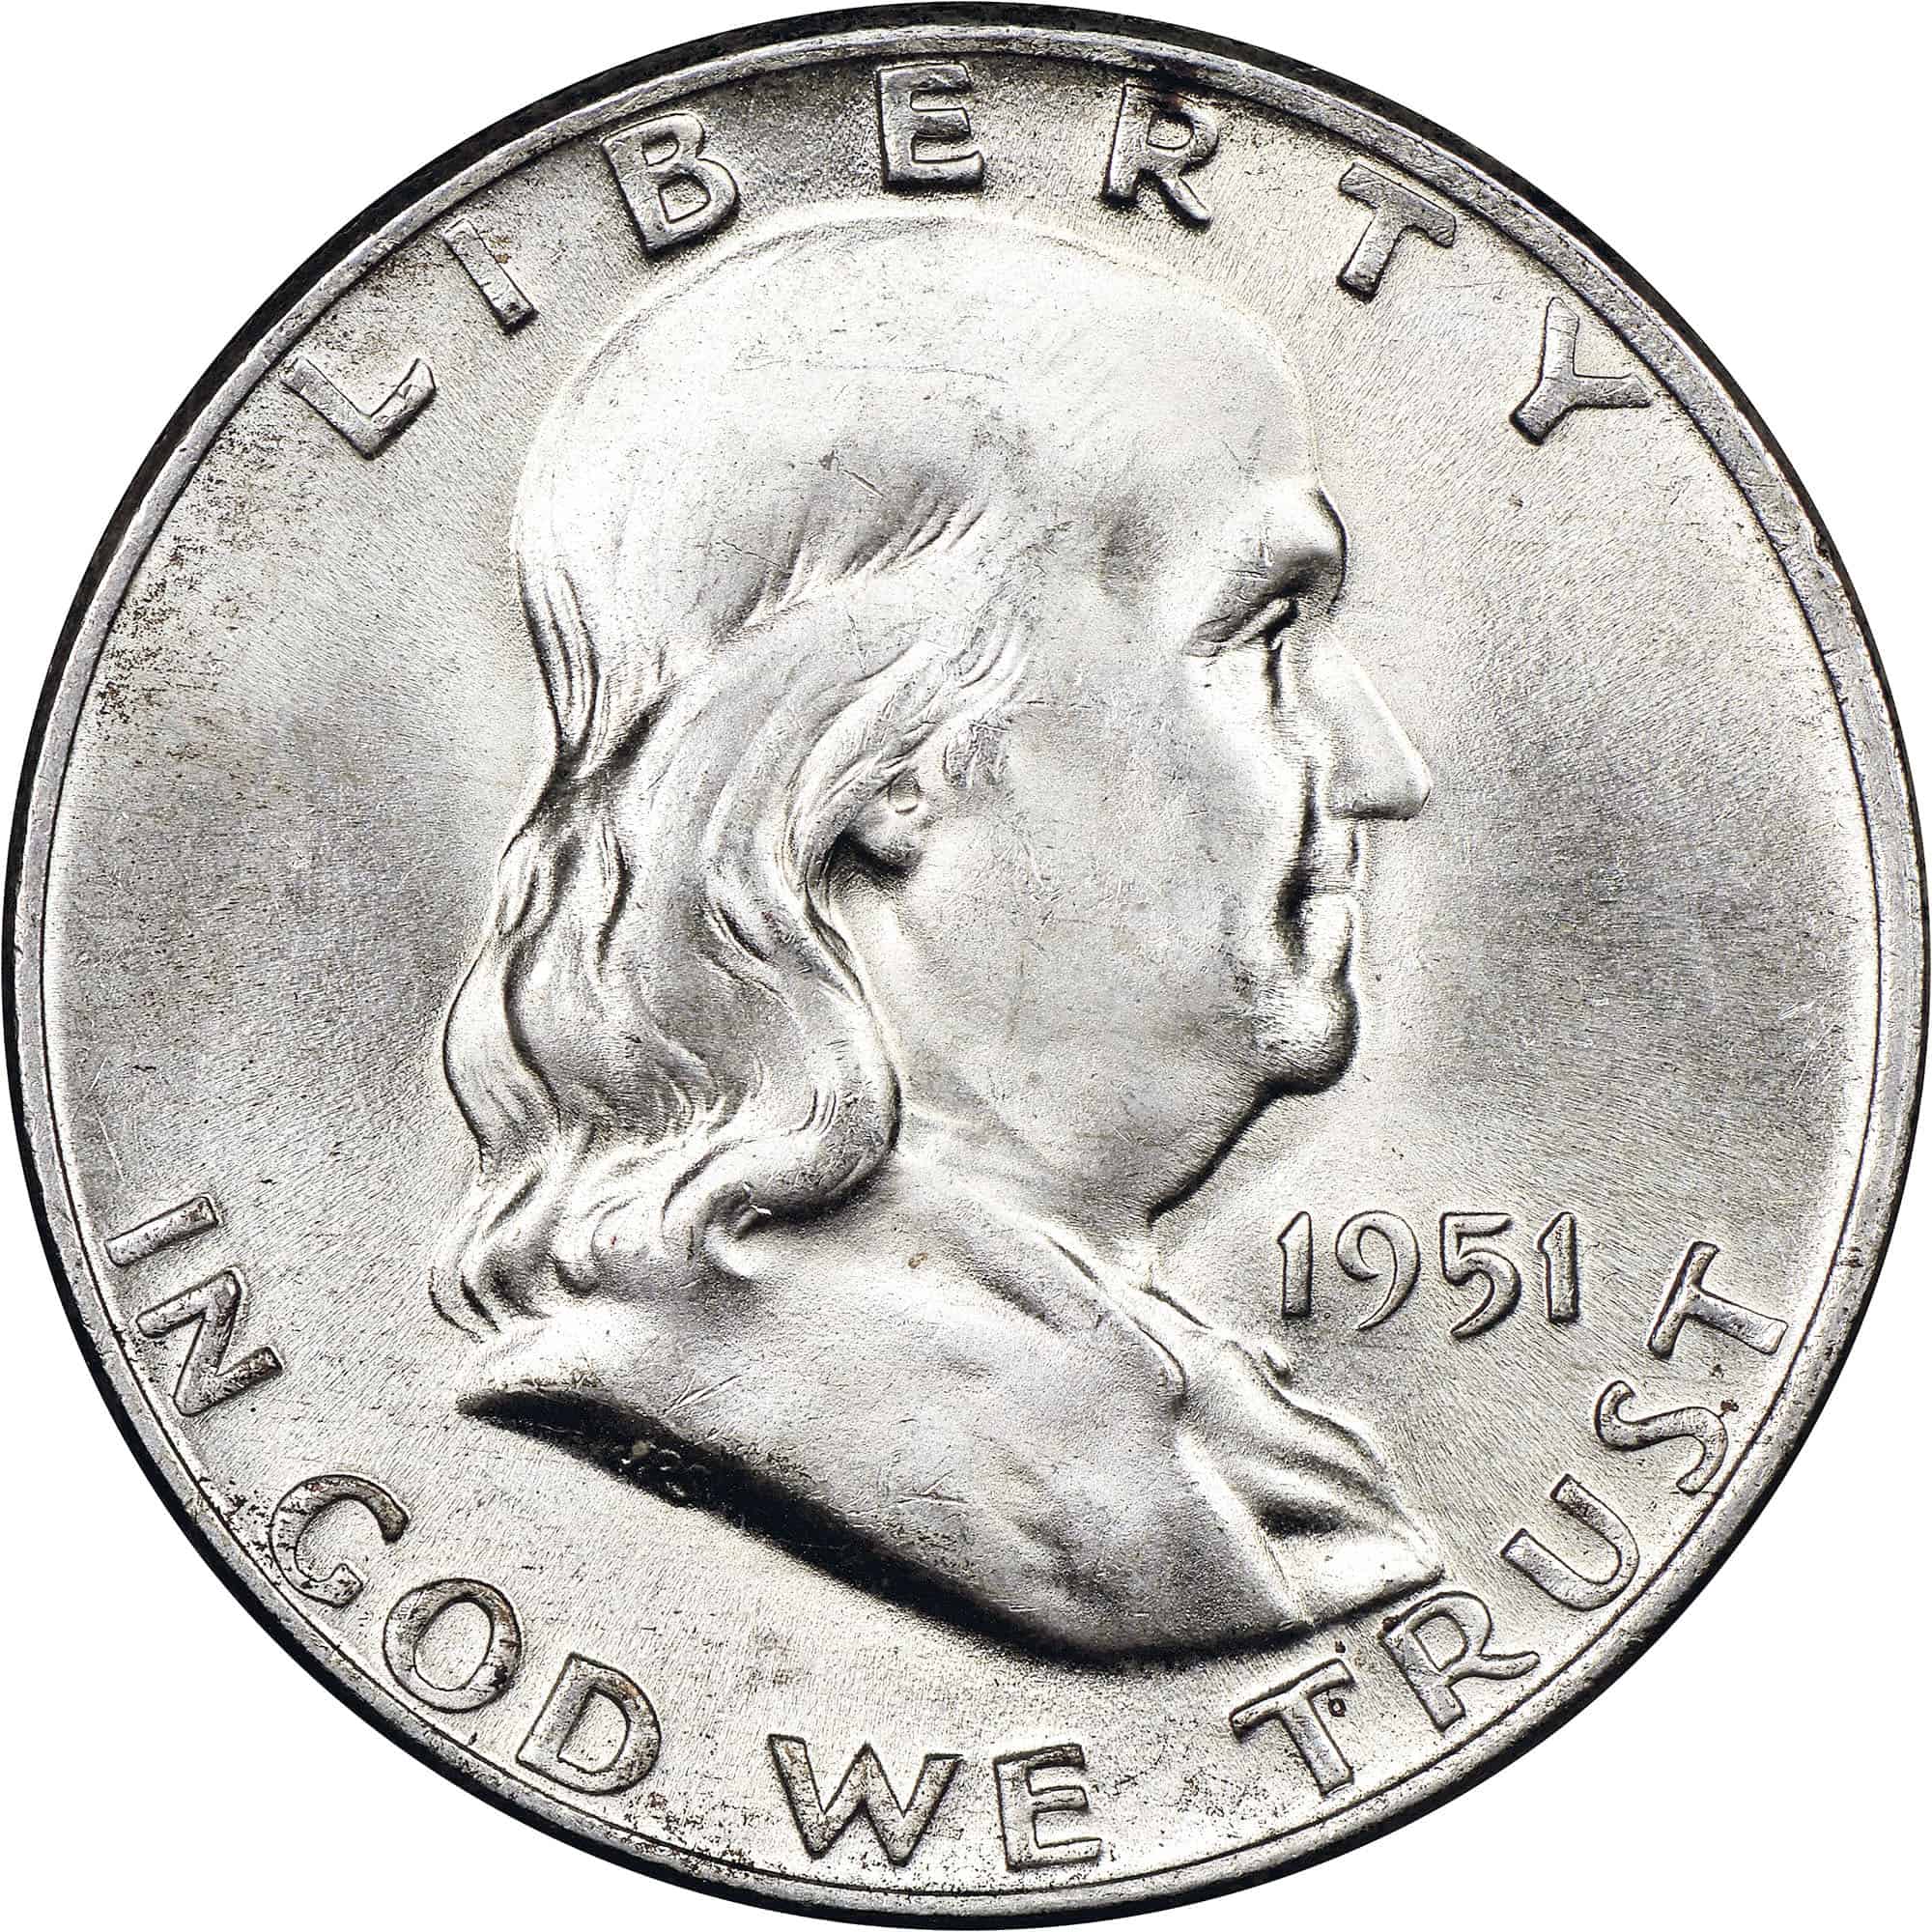 The Obverse of the 1951 Half Dollar